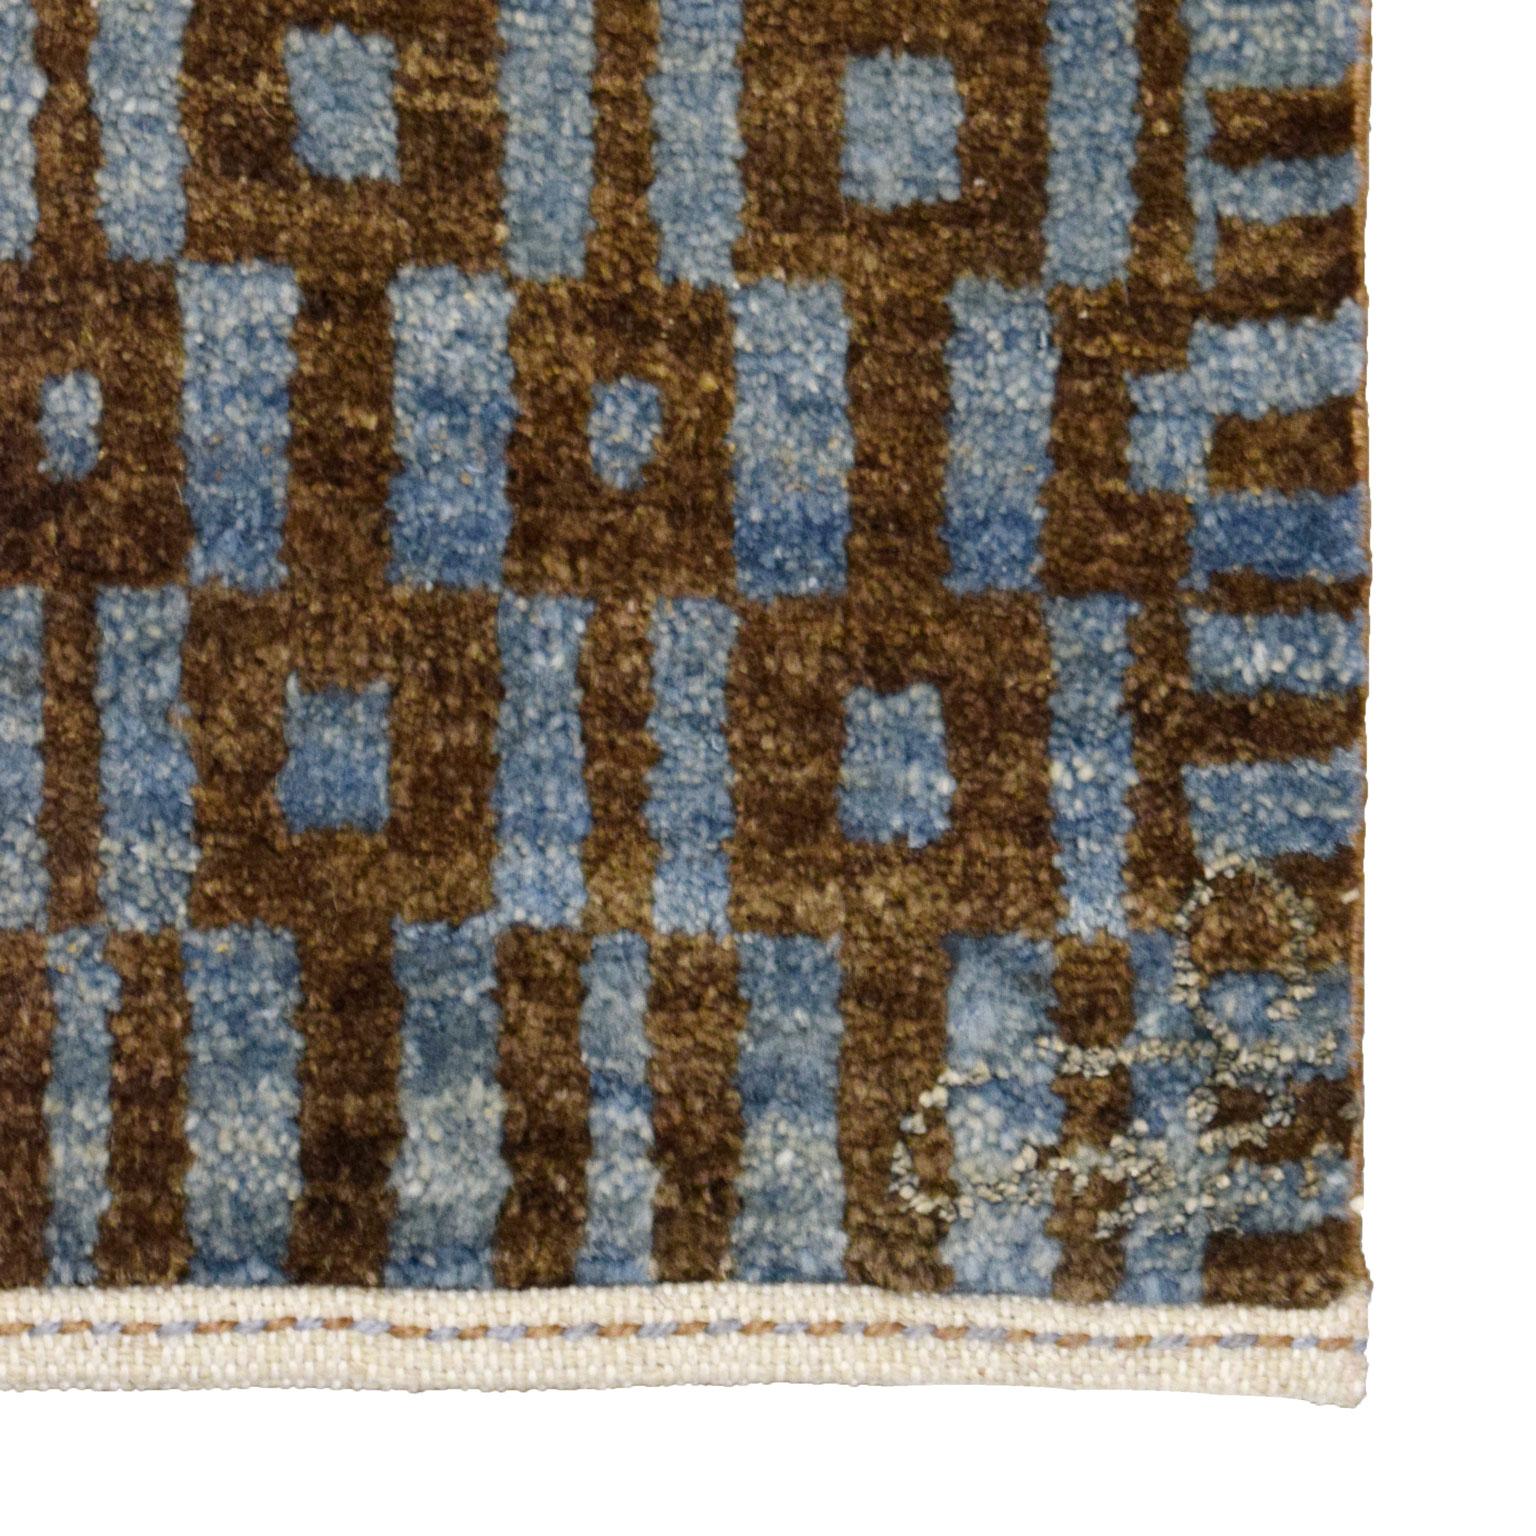 Contemporary Persian Rug, Blue and Brown Wool, Orley Shabahang, 4' x 6' In New Condition For Sale In New York, NY